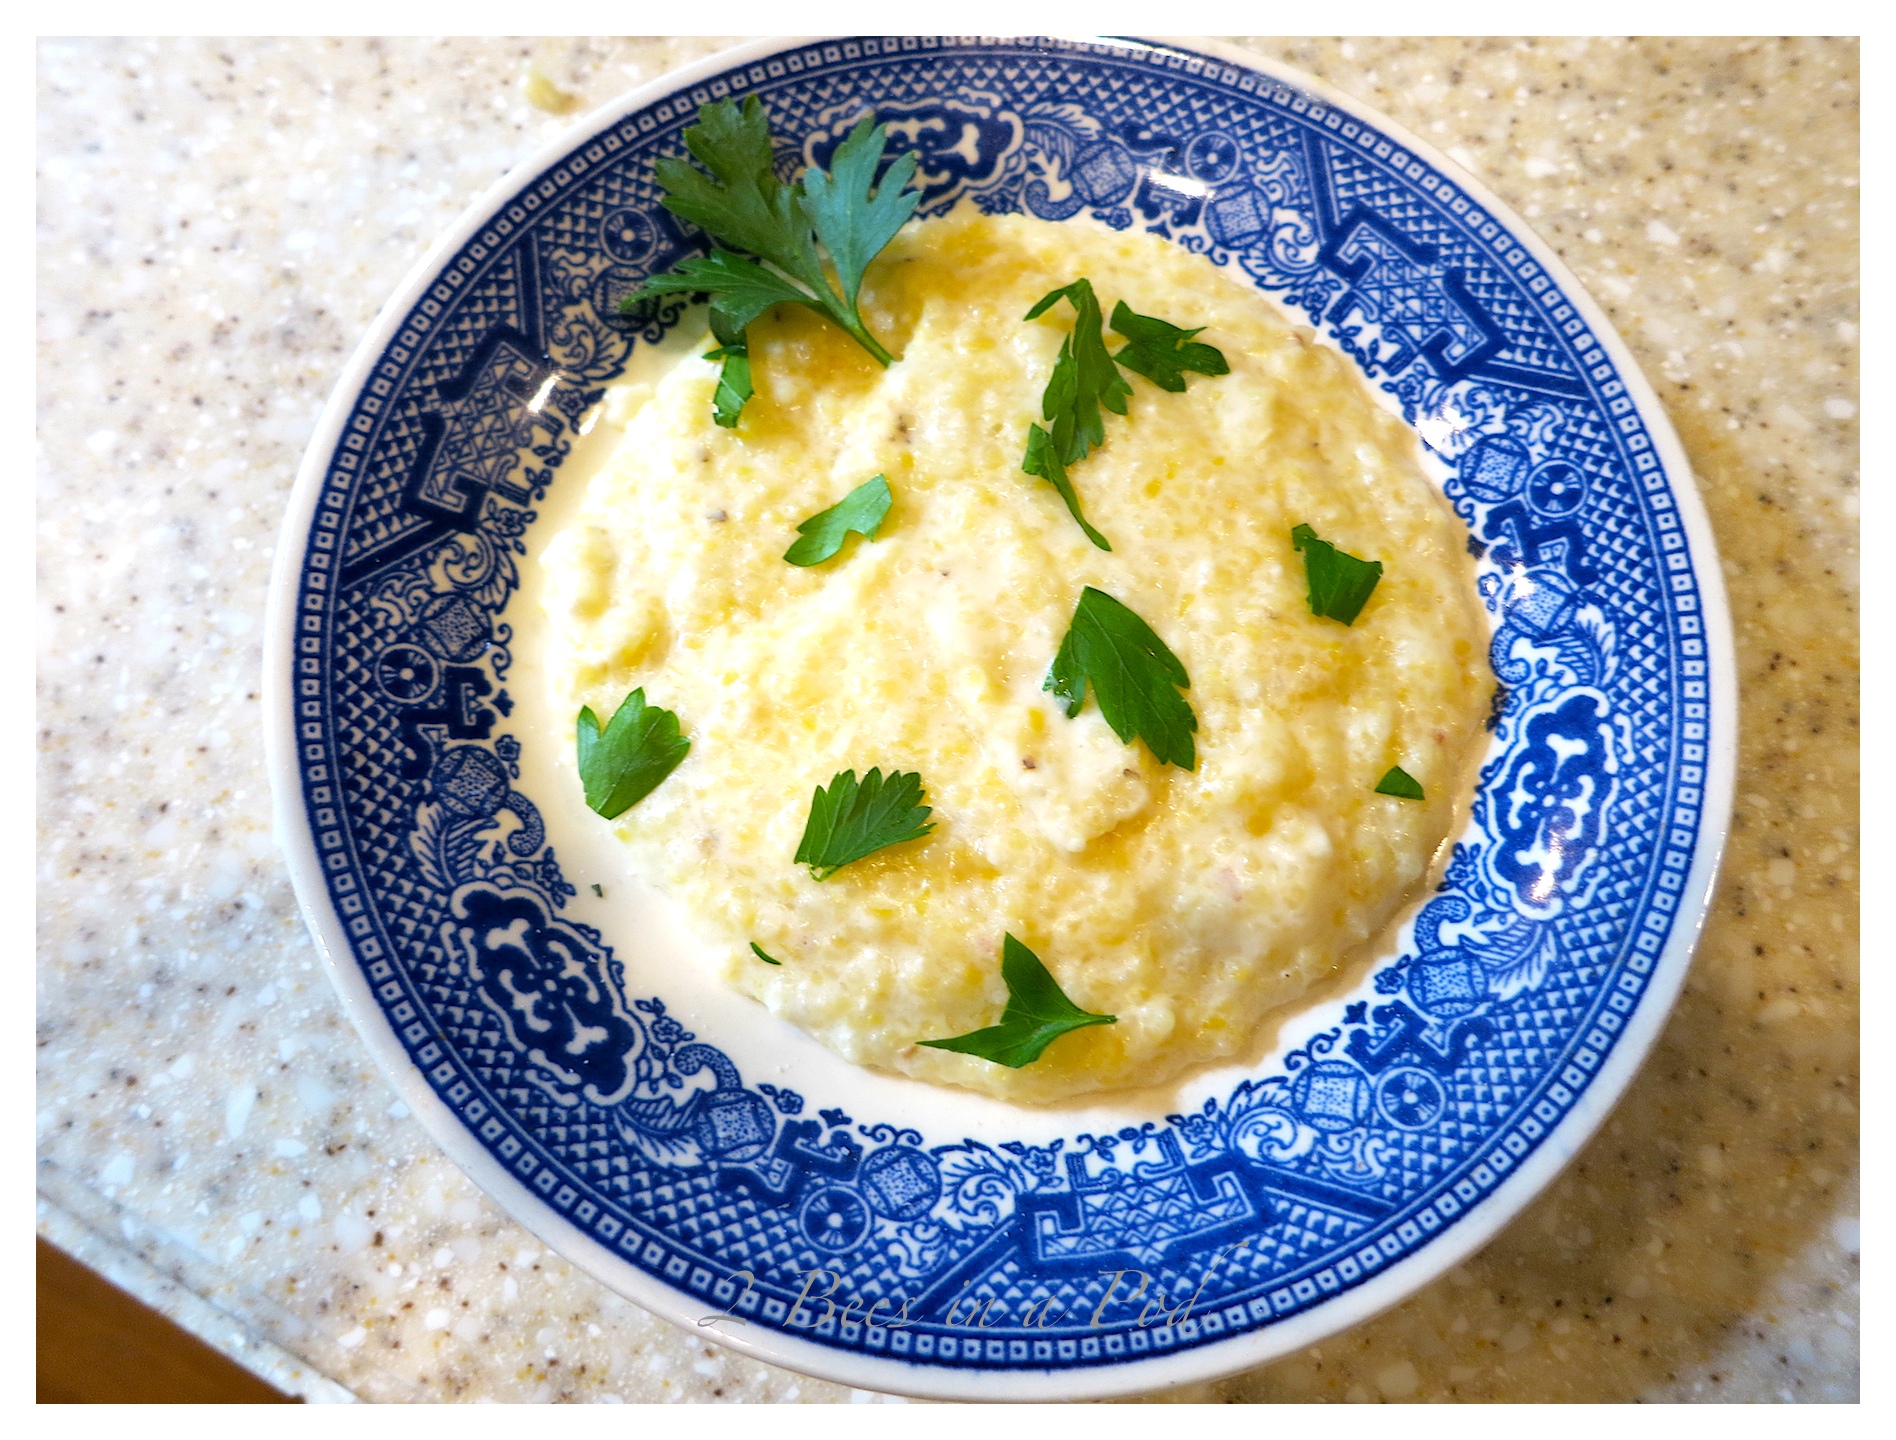 Decadent parmesan cheese grits. The speckled yellow grits from Nora Mill Granary are known as "Dixie Ice Cream". Cooked on water and half and half make these grits super creamy.